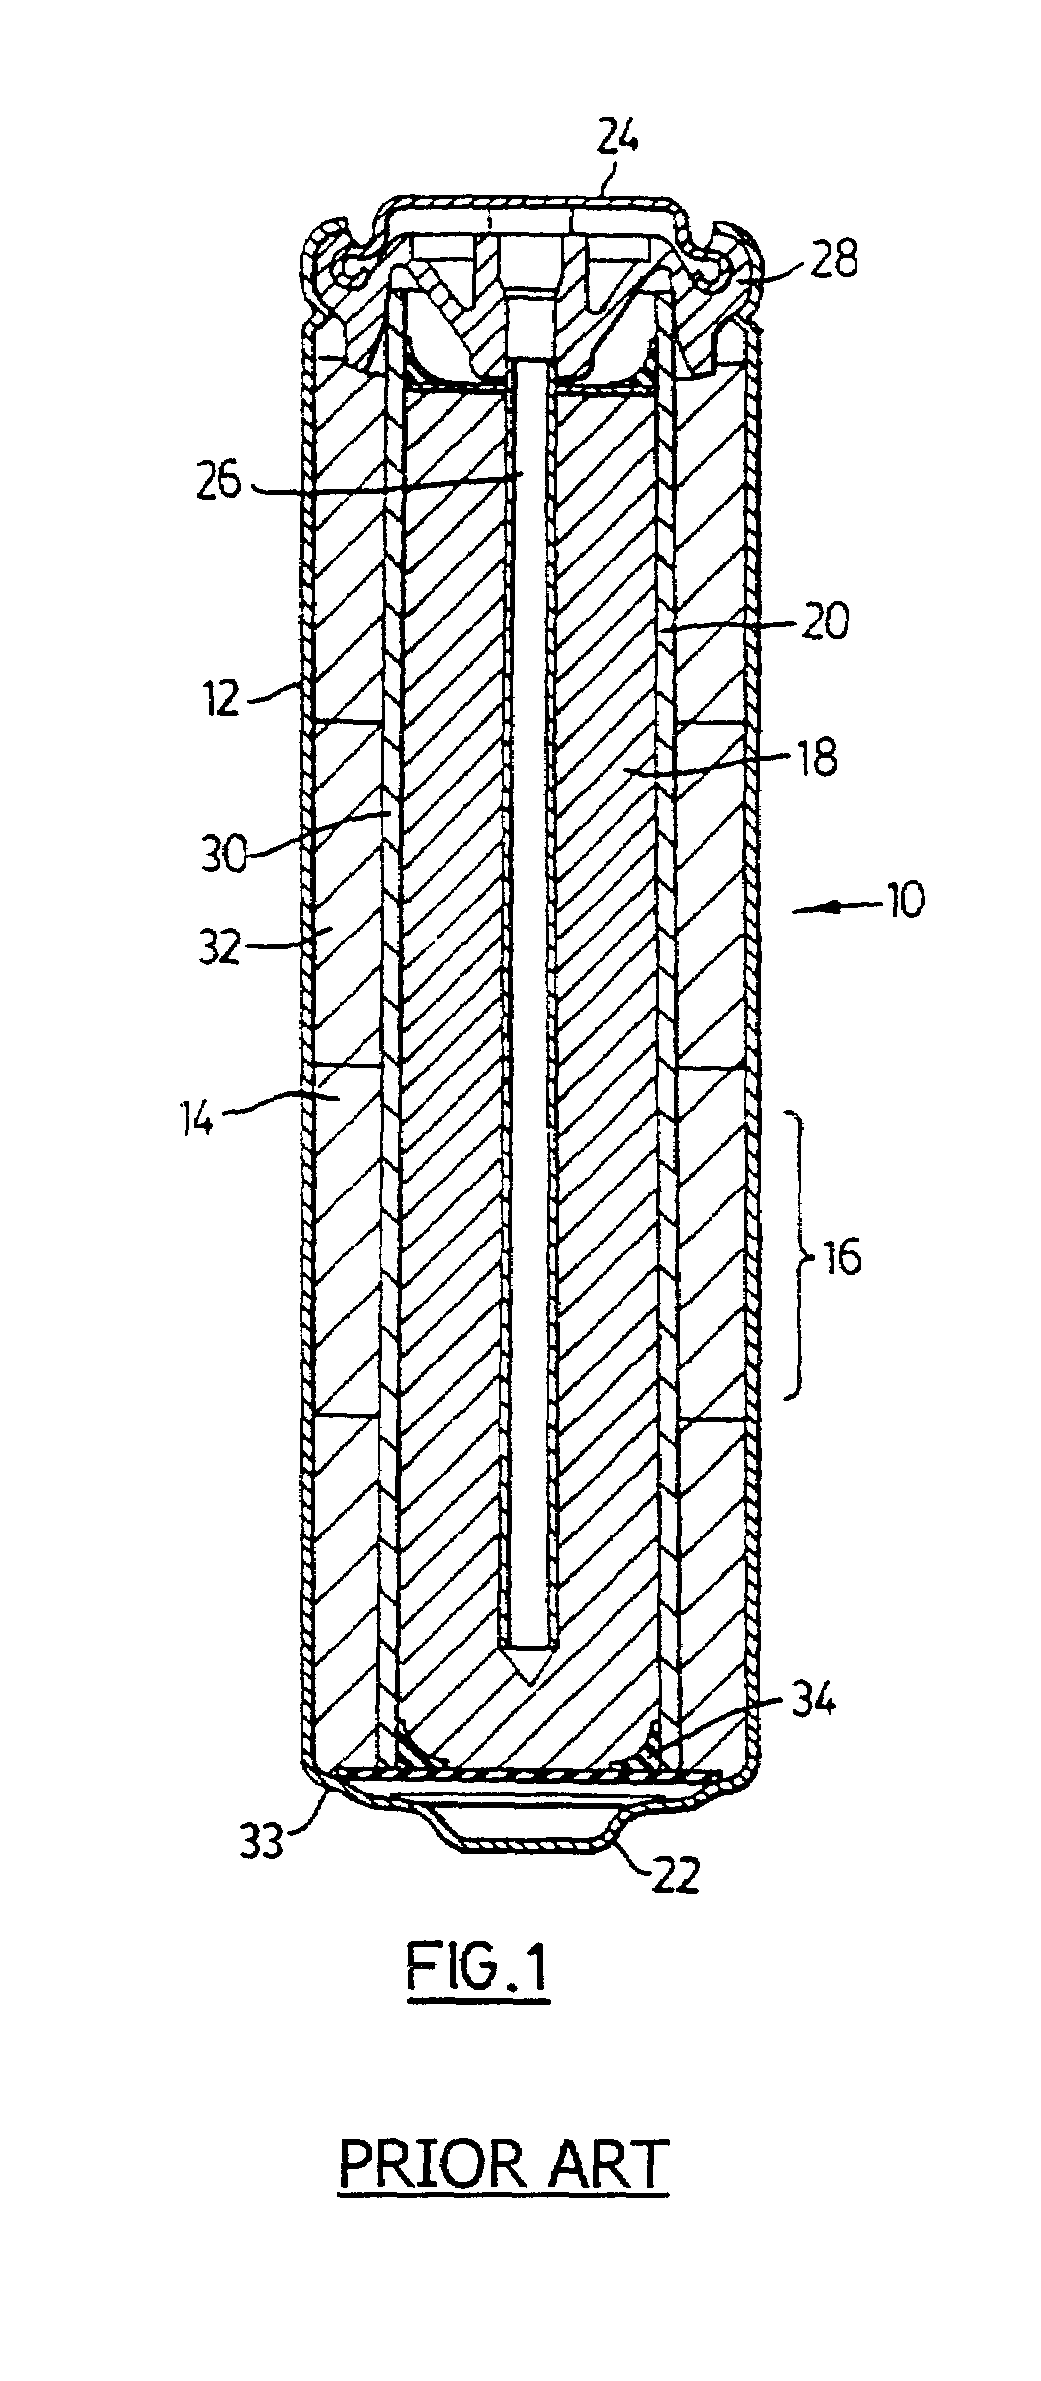 Method of manufacture of an anode composition for use in a rechargeable electrochemical cell